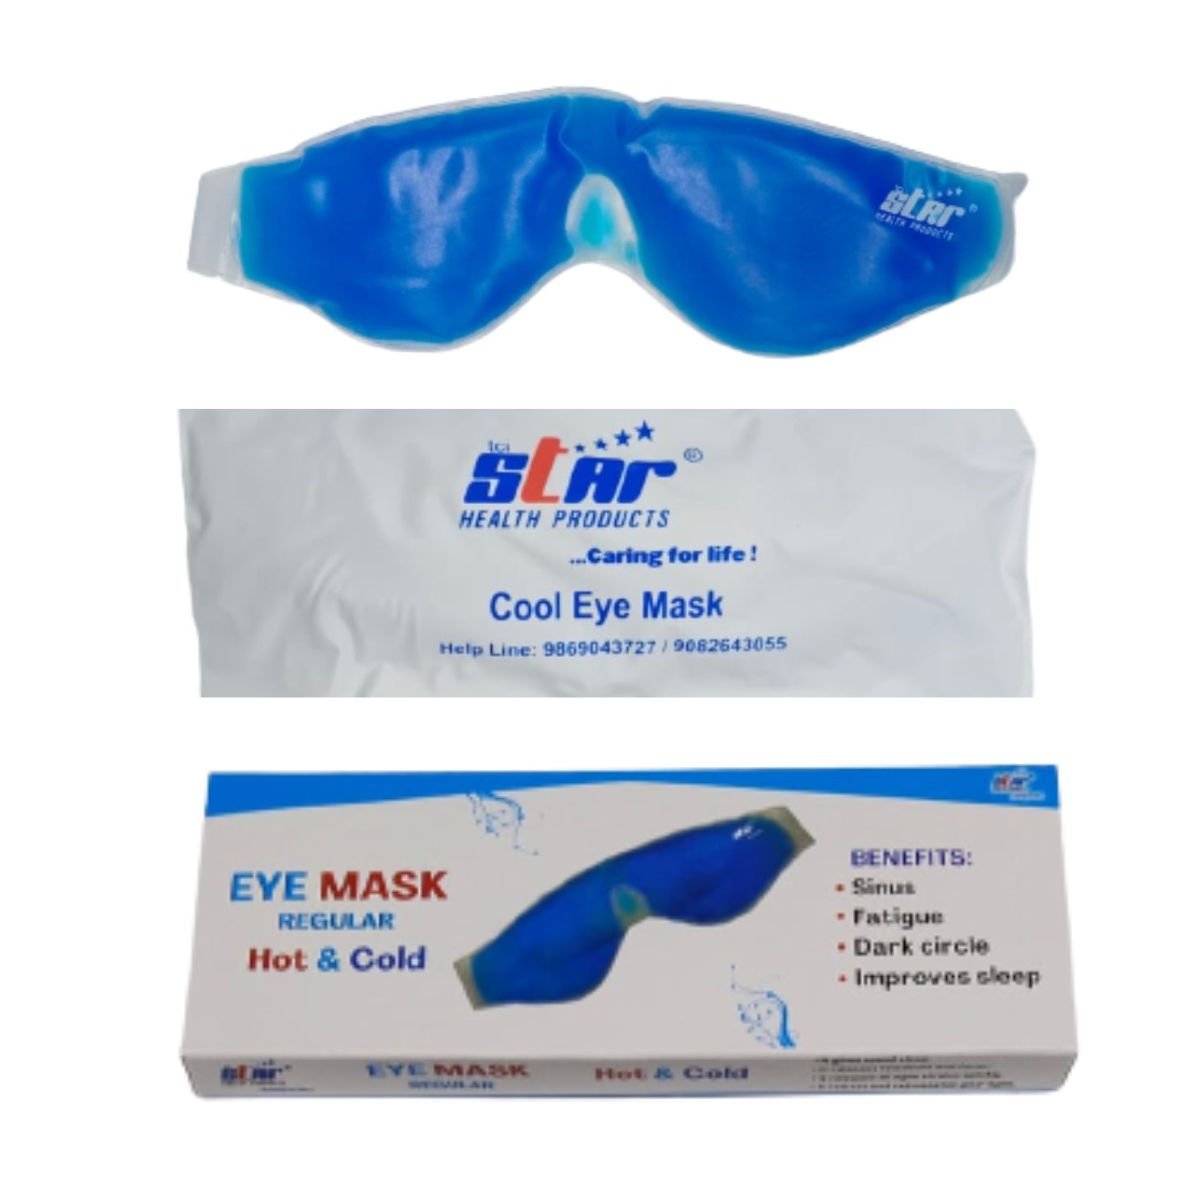 Relax and unwind with the cooling sensation of our gel eye mask.